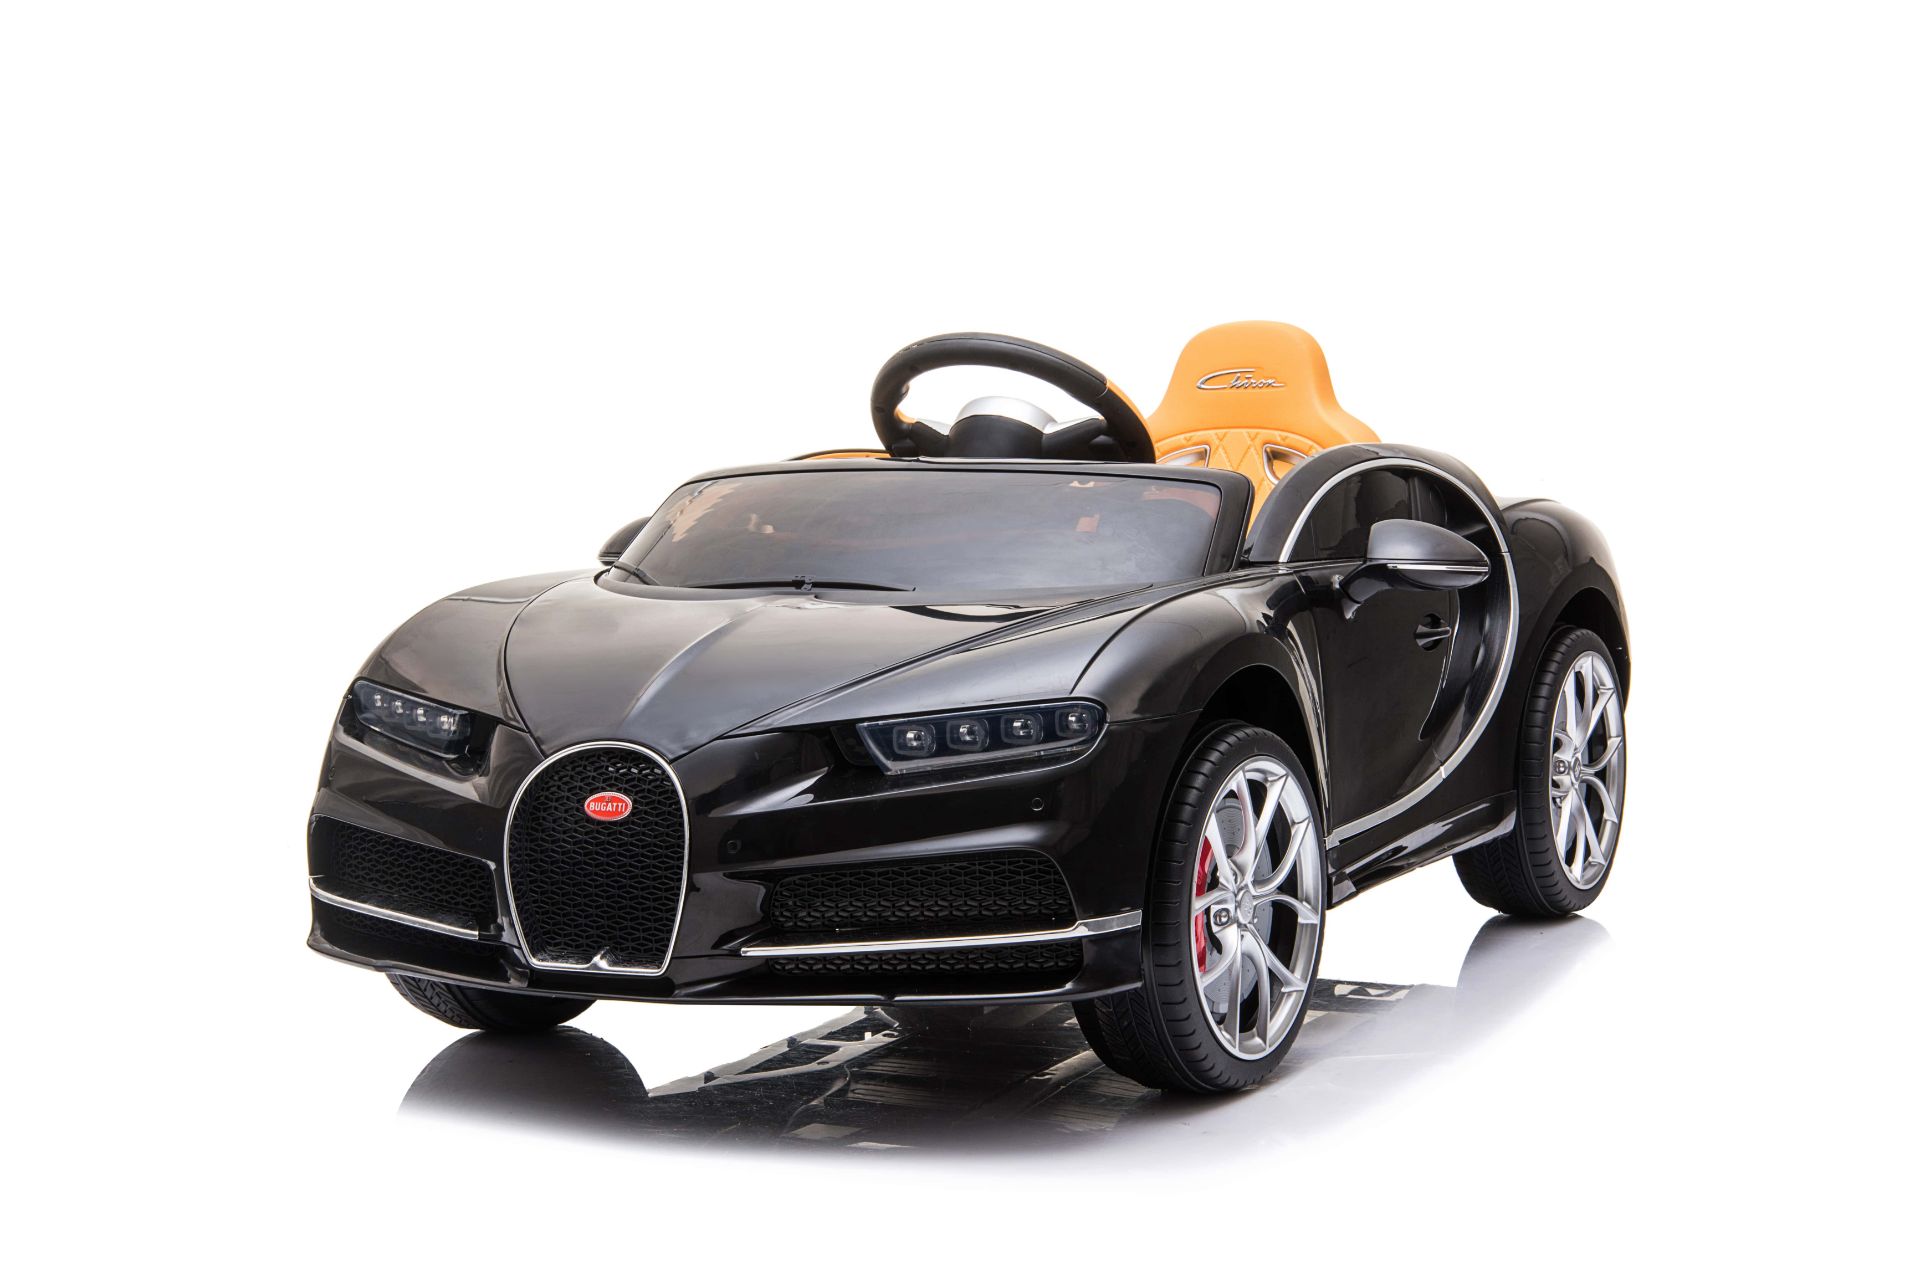 RIDE ON FULLY LICENCED BUGATTI CHIRON 12V WITH PARENTAL REMOTE CONTROL - BLACK - Image 7 of 7